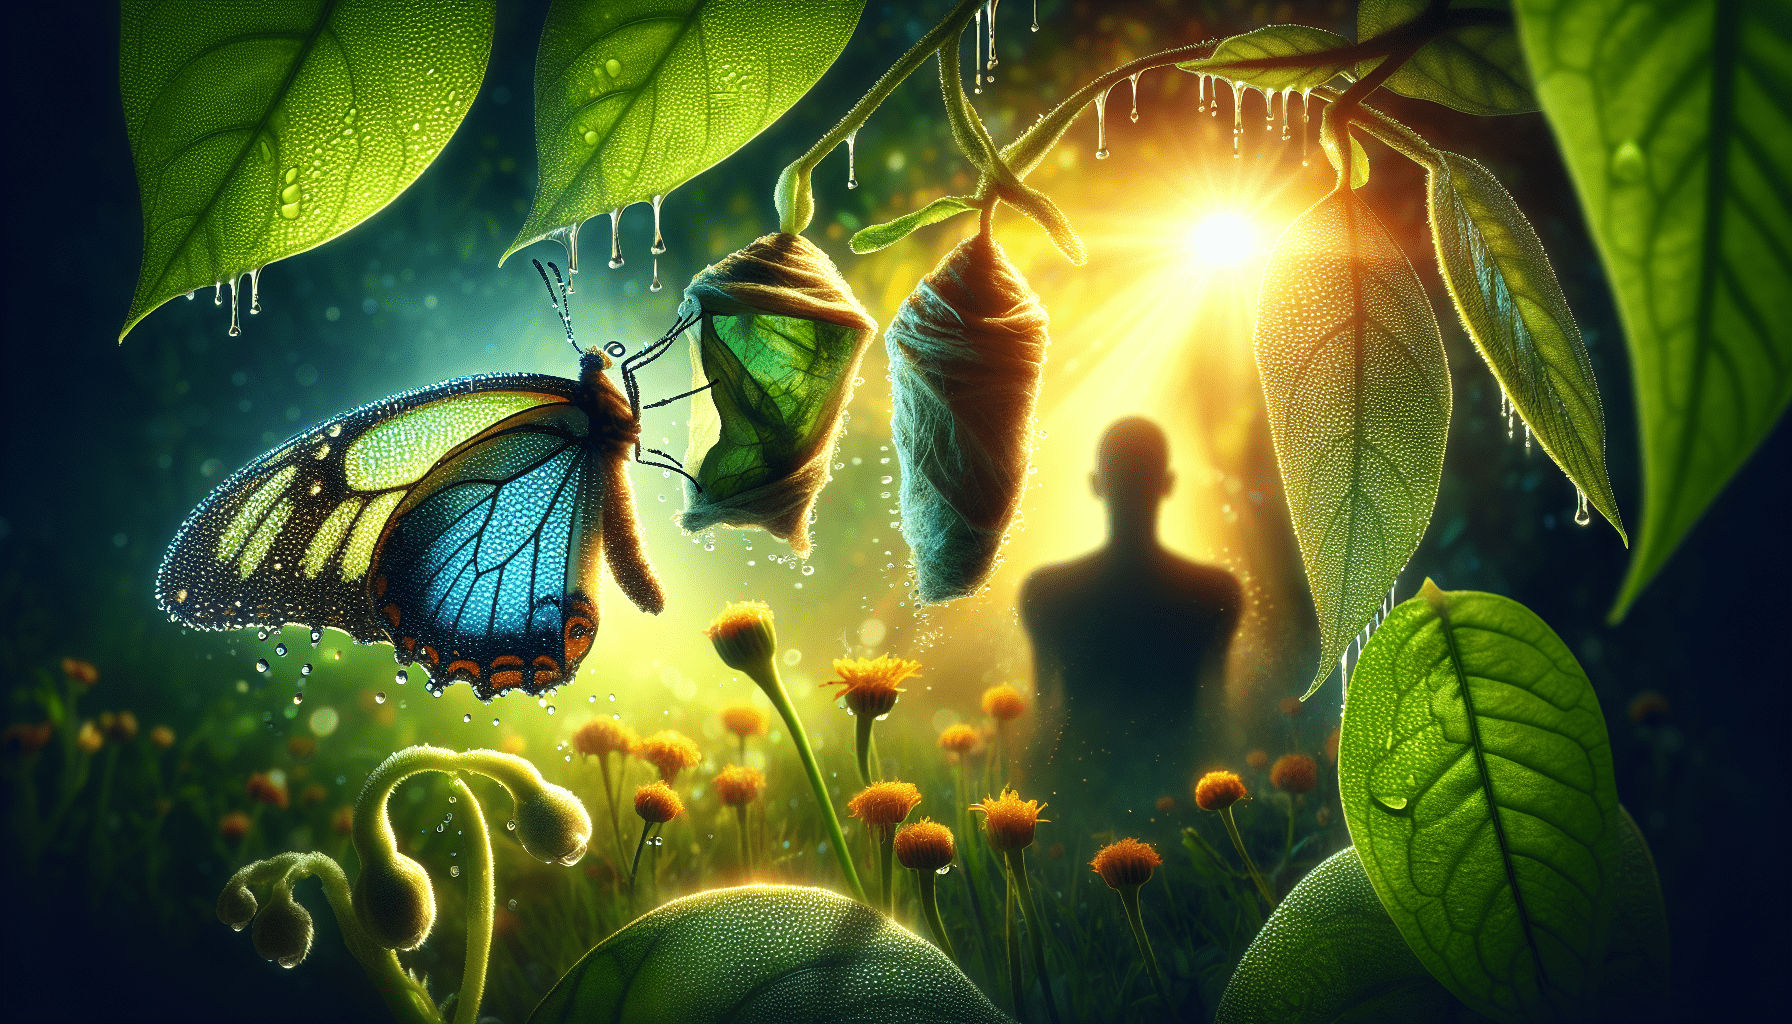 A vibrant digital artwork depicting a butterfly and two chrysalises hanging from dewy, sunlit leaves, with a silhouette of a human meditating peacefully in the background.